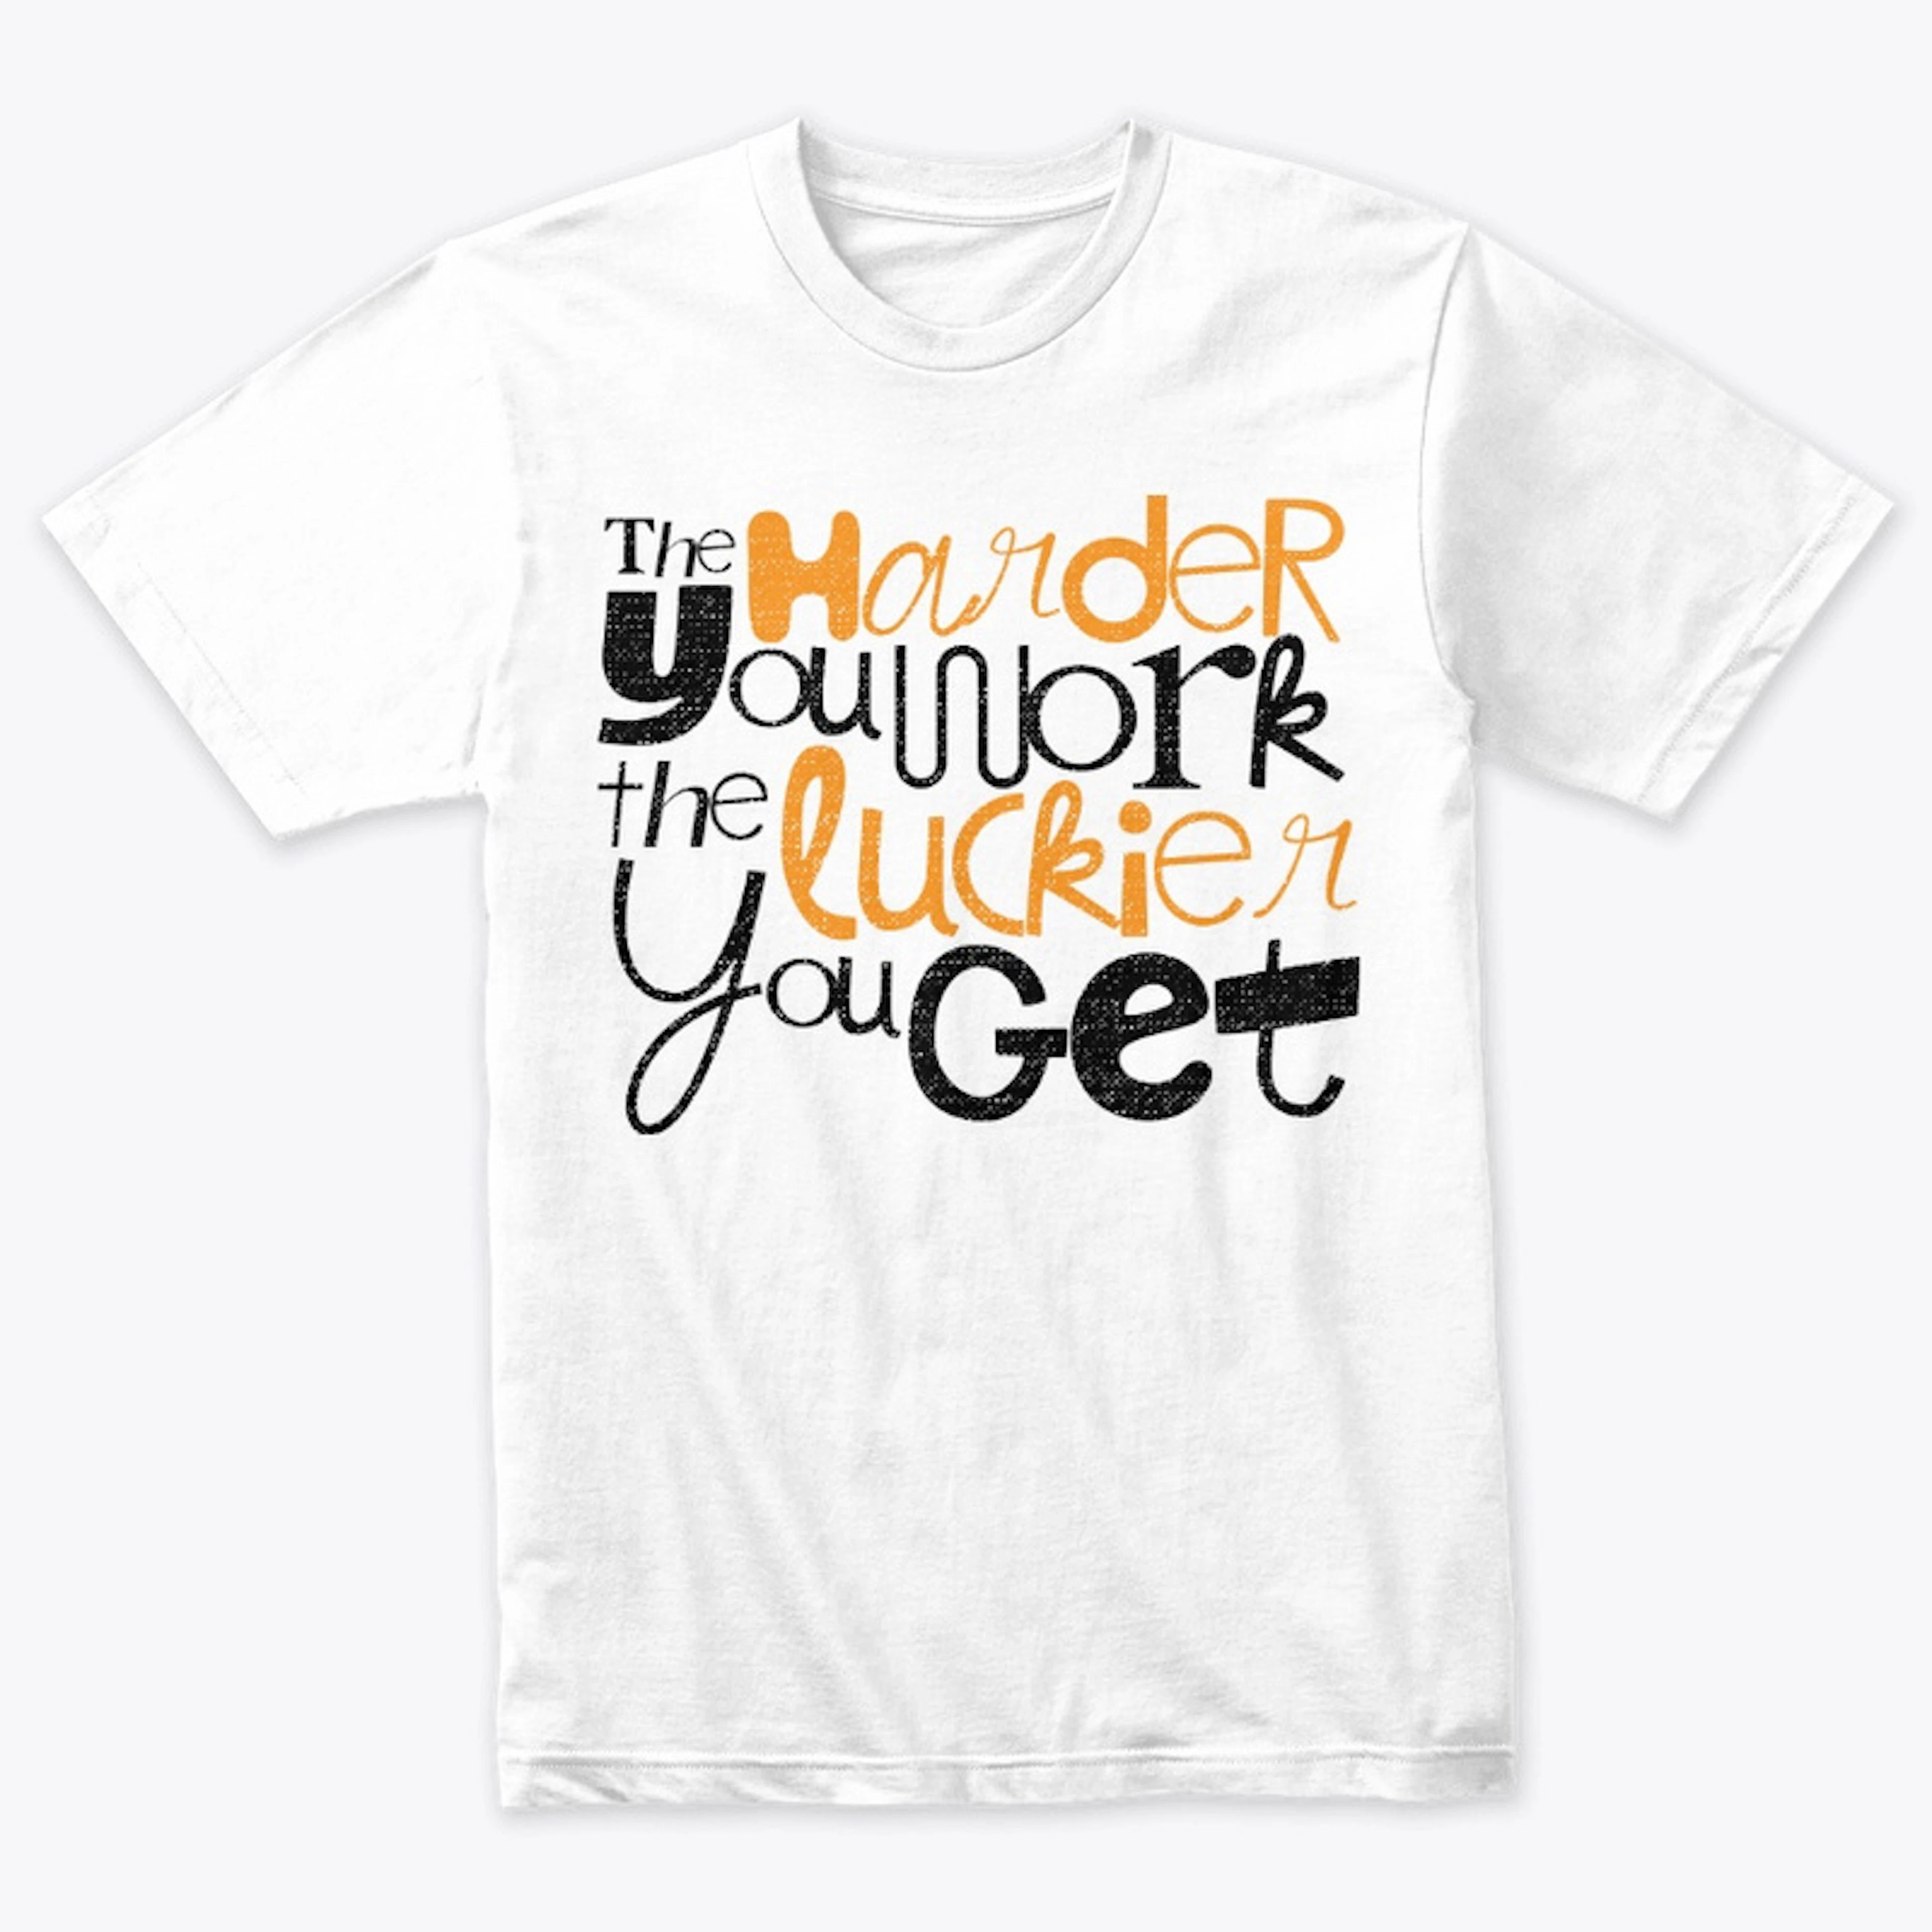 The harder you work designs